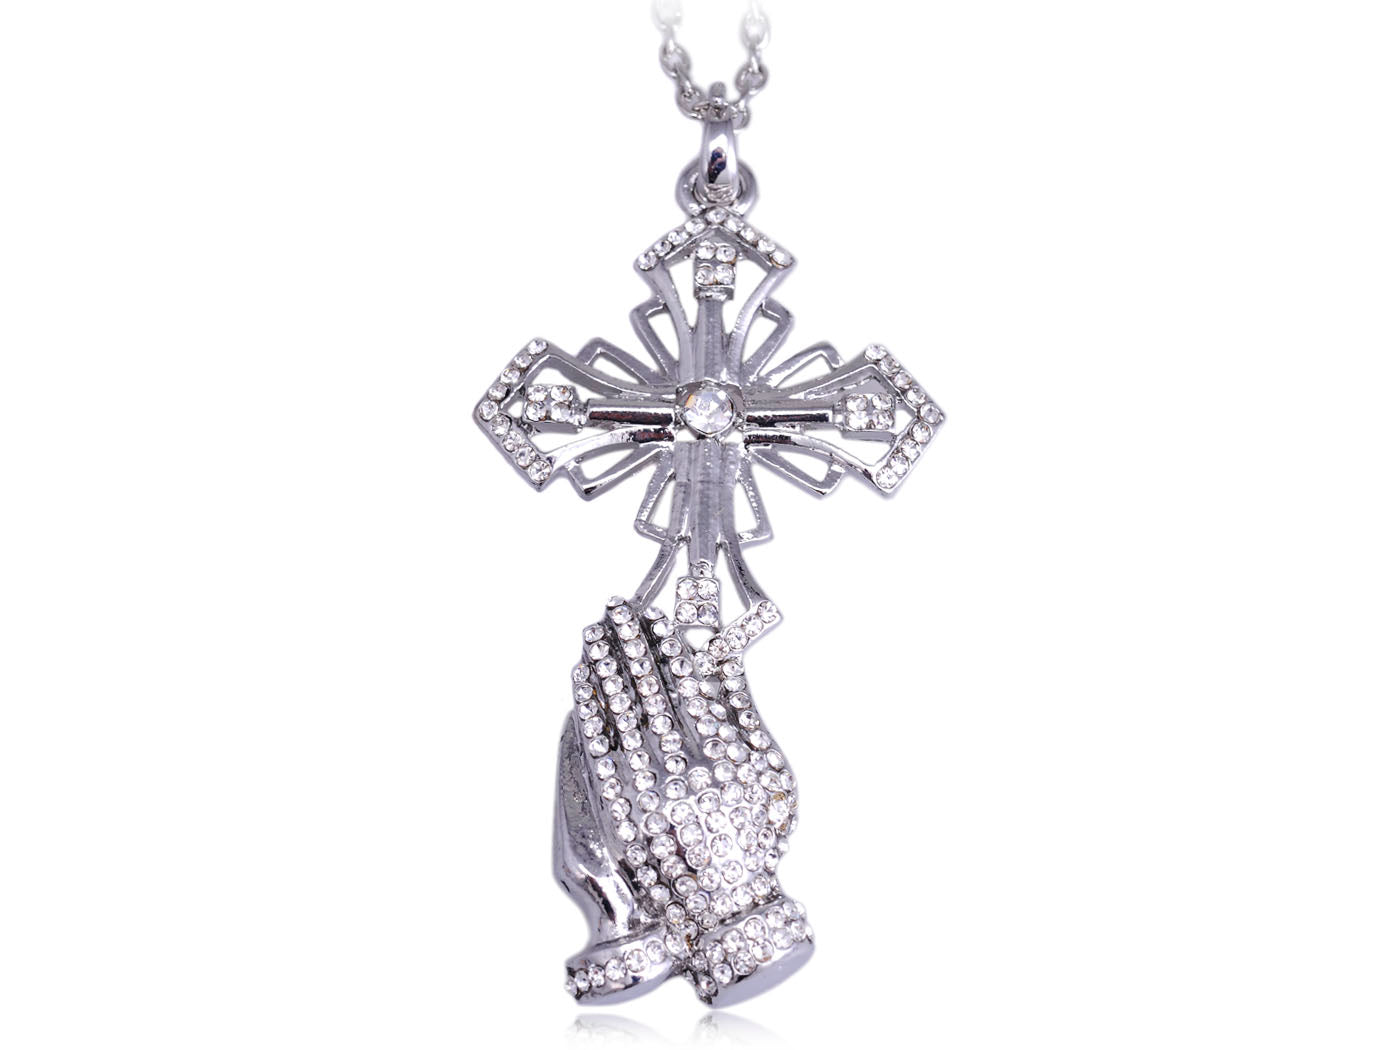 Praying Hands Worship Religious Cross Holy Pendant Necklace